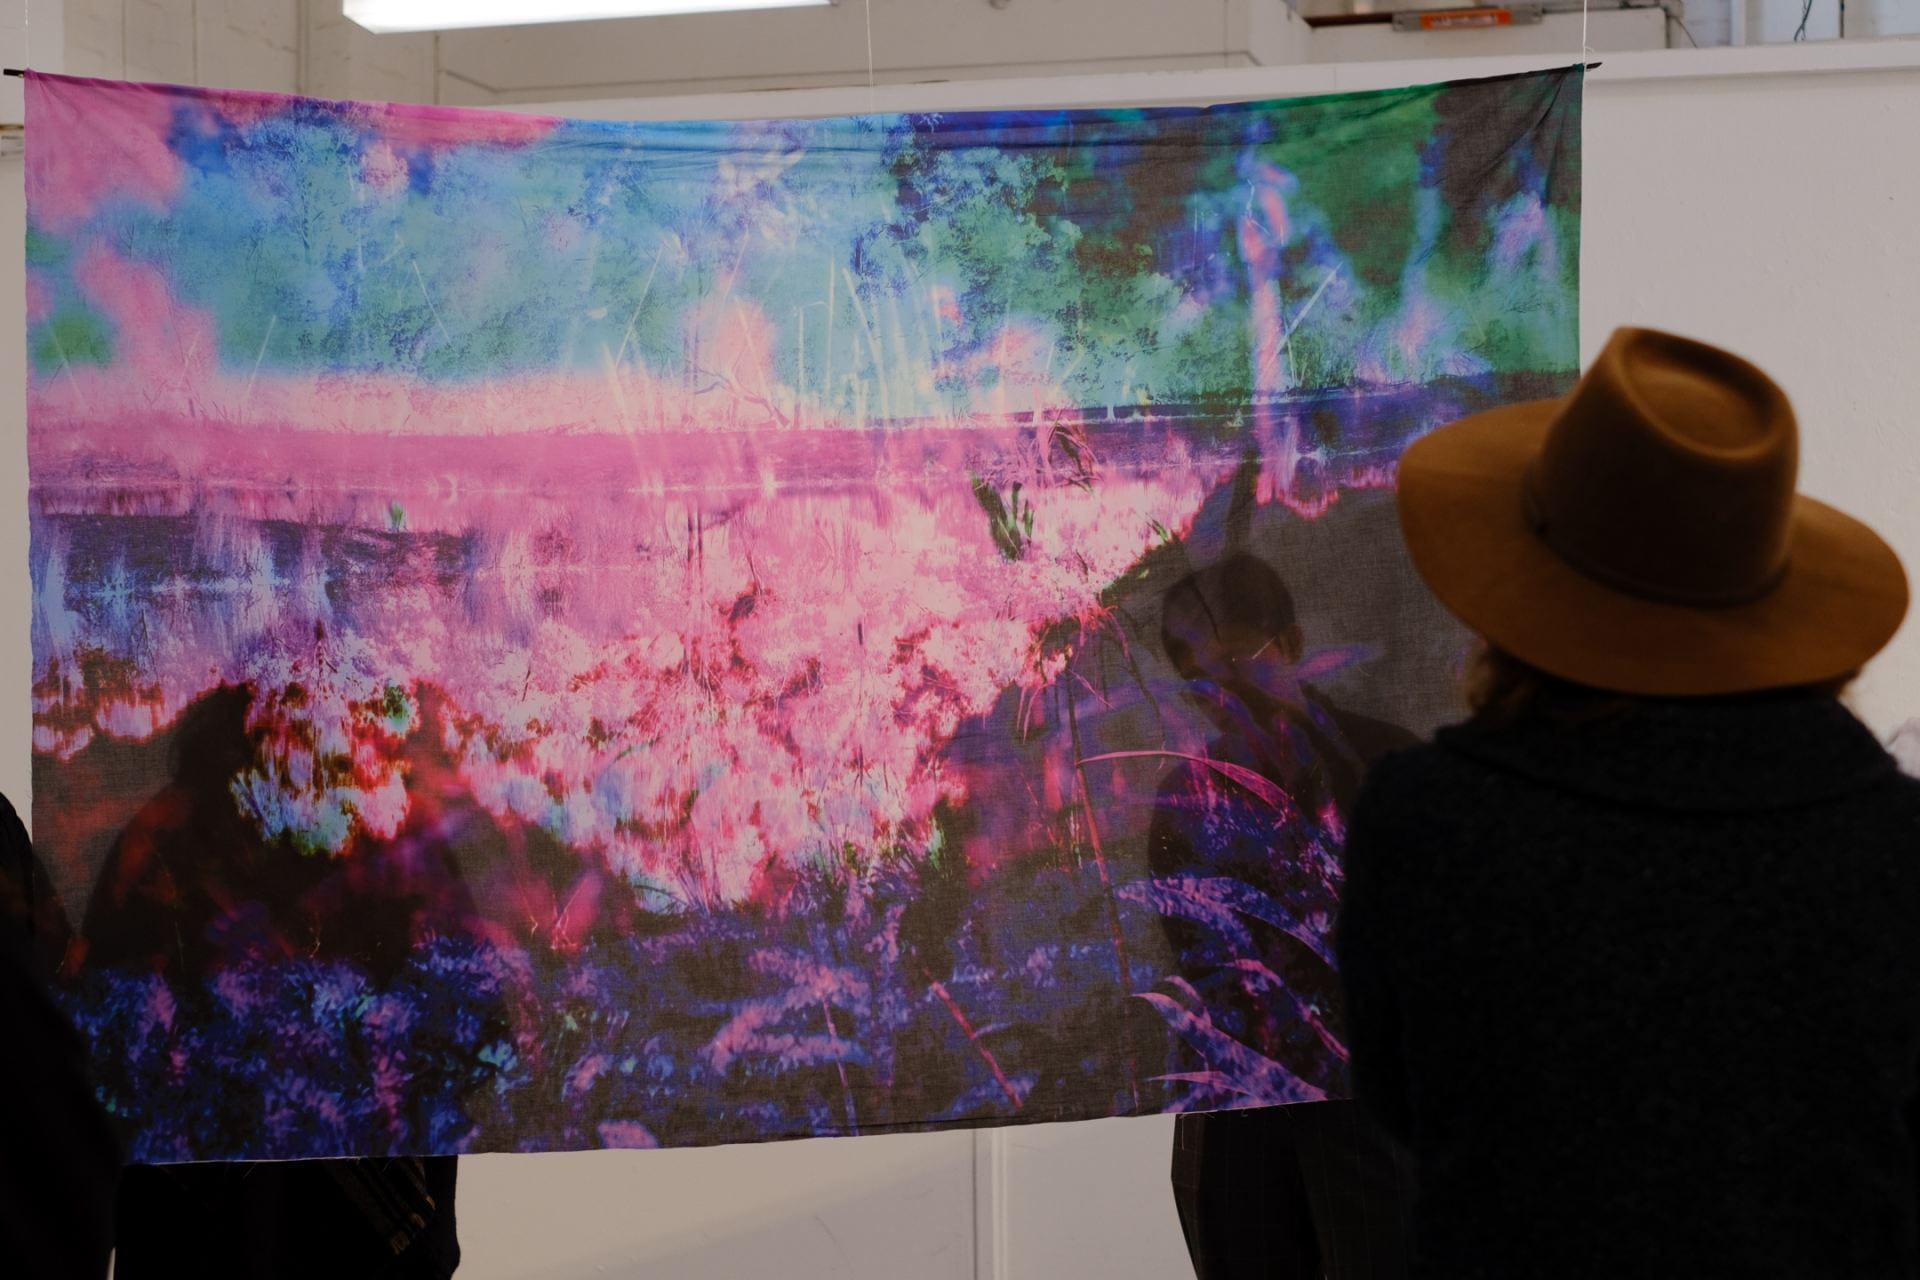 Installation view of an abstracted landscape image printed on fabric